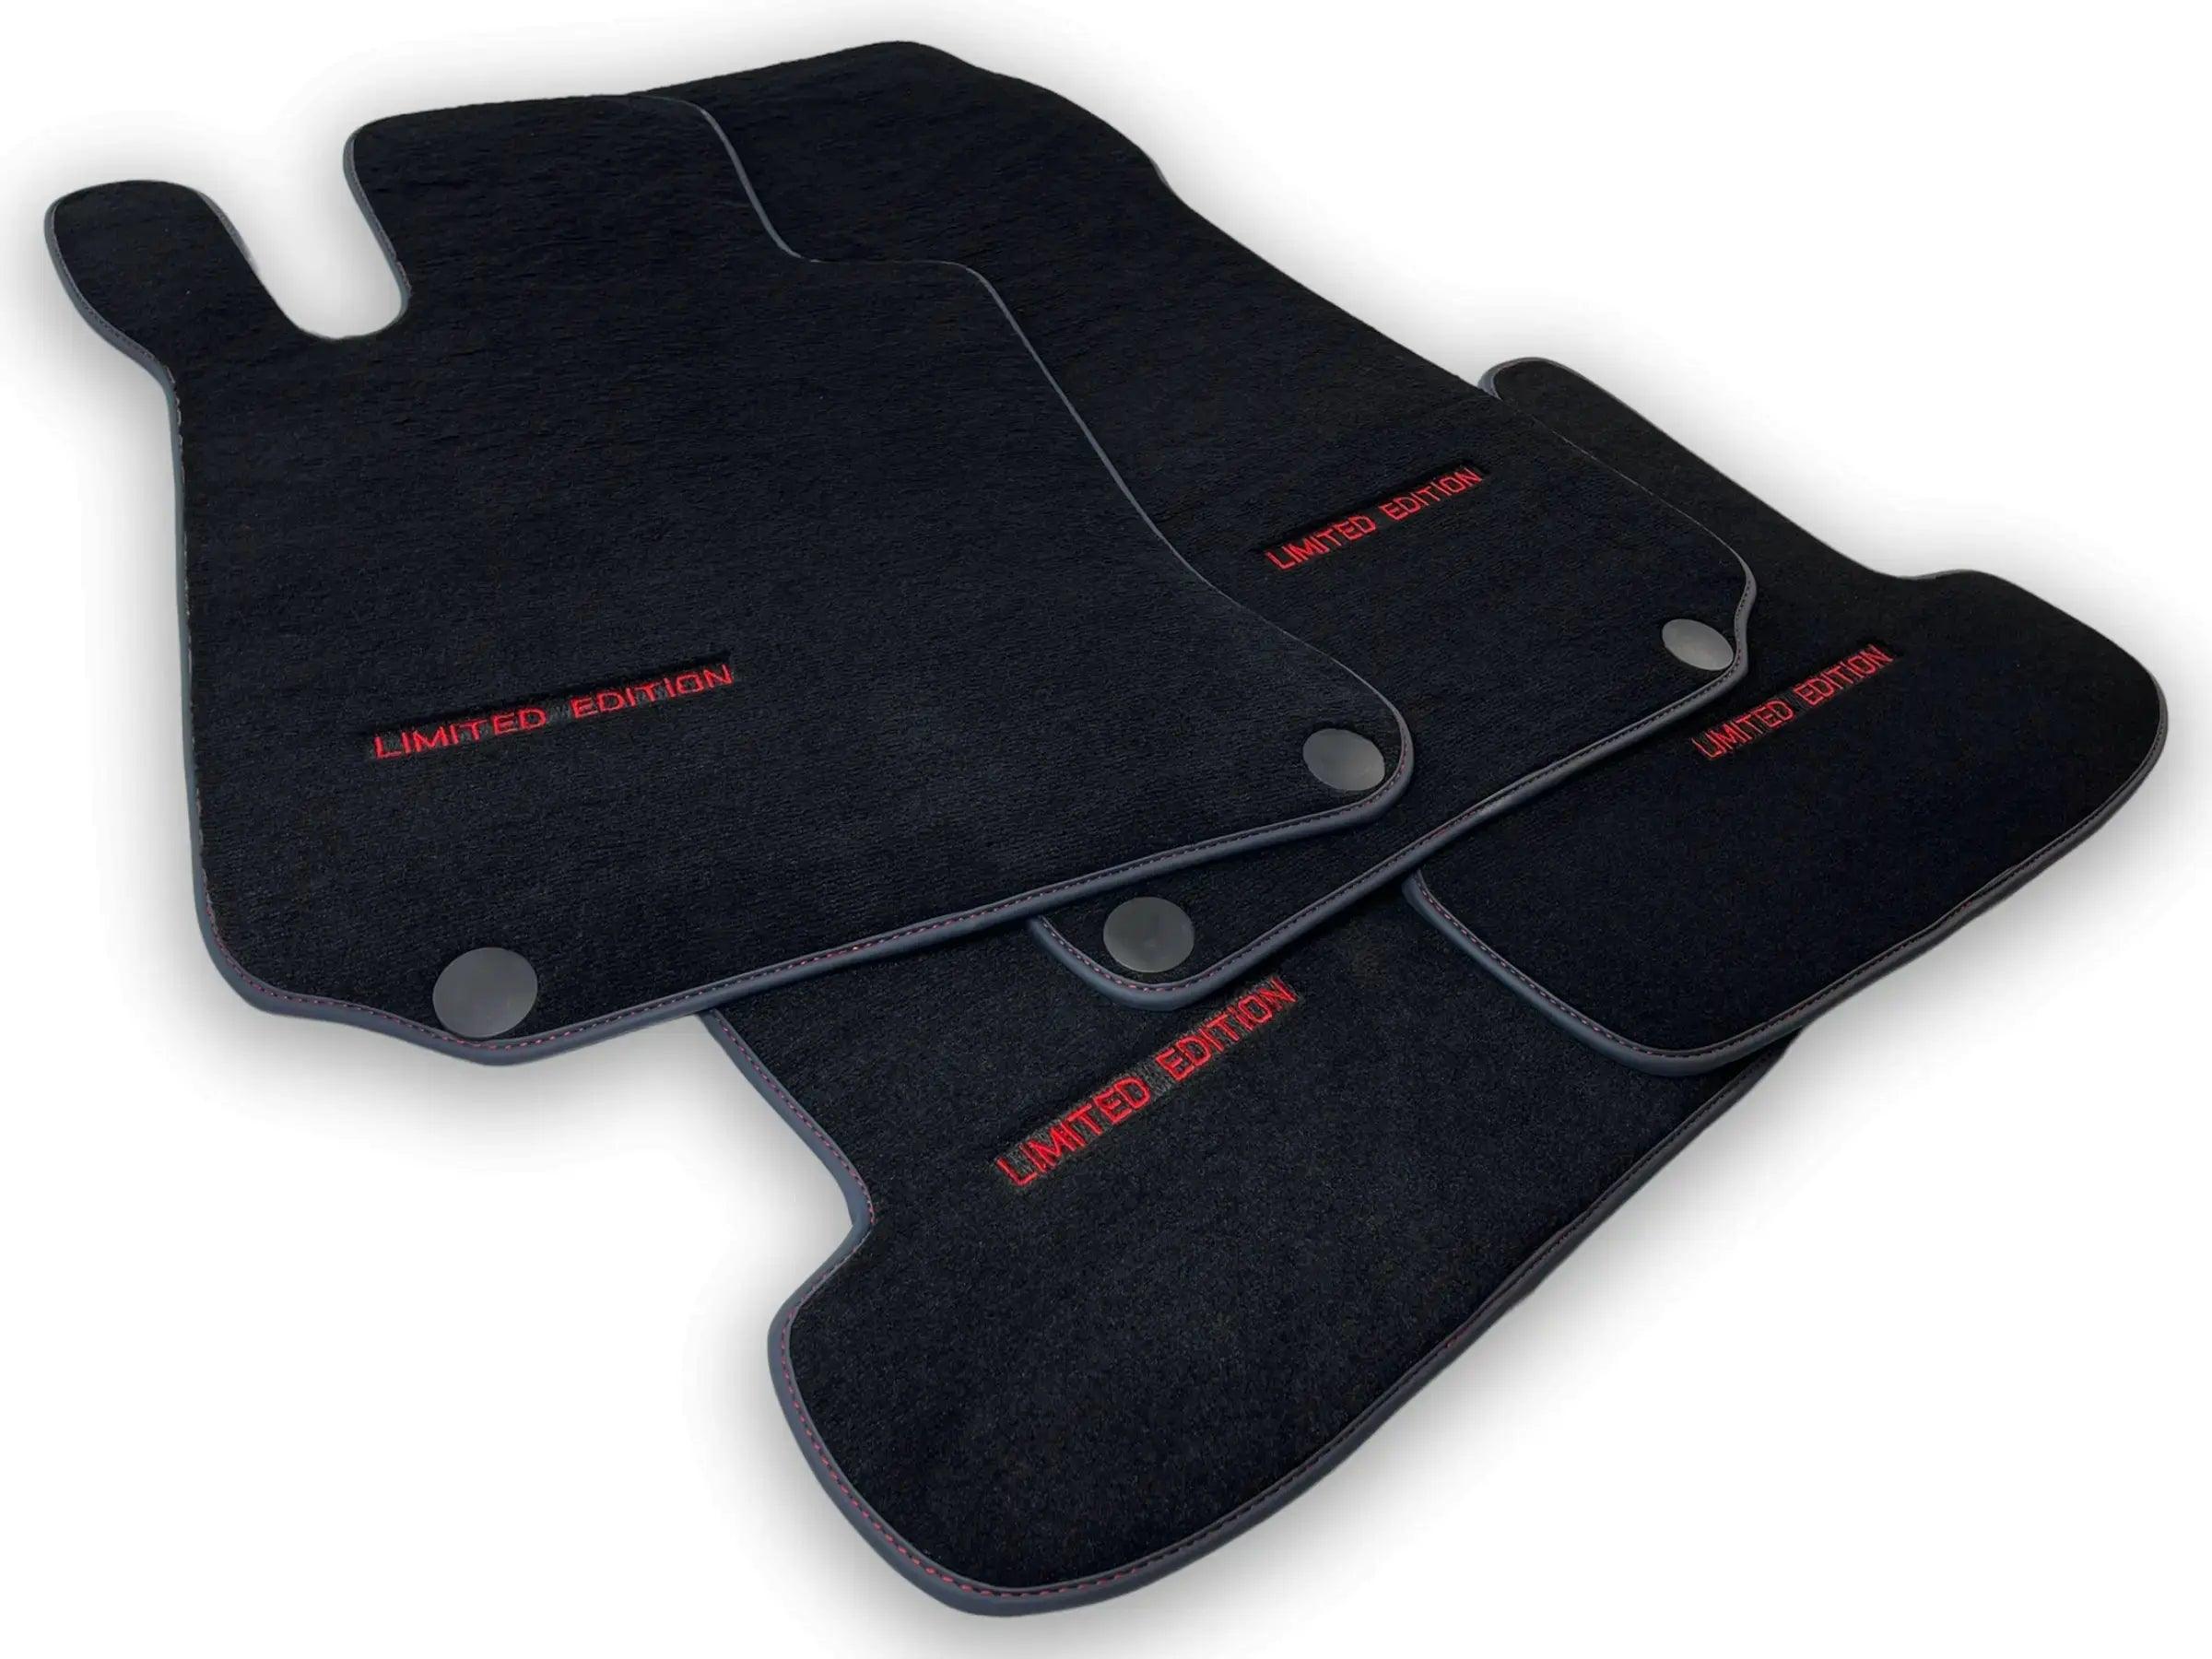 Black Floor Mats For Mercedes Benz E-Class C207 Coupe (2009-2013) | Limited Edition